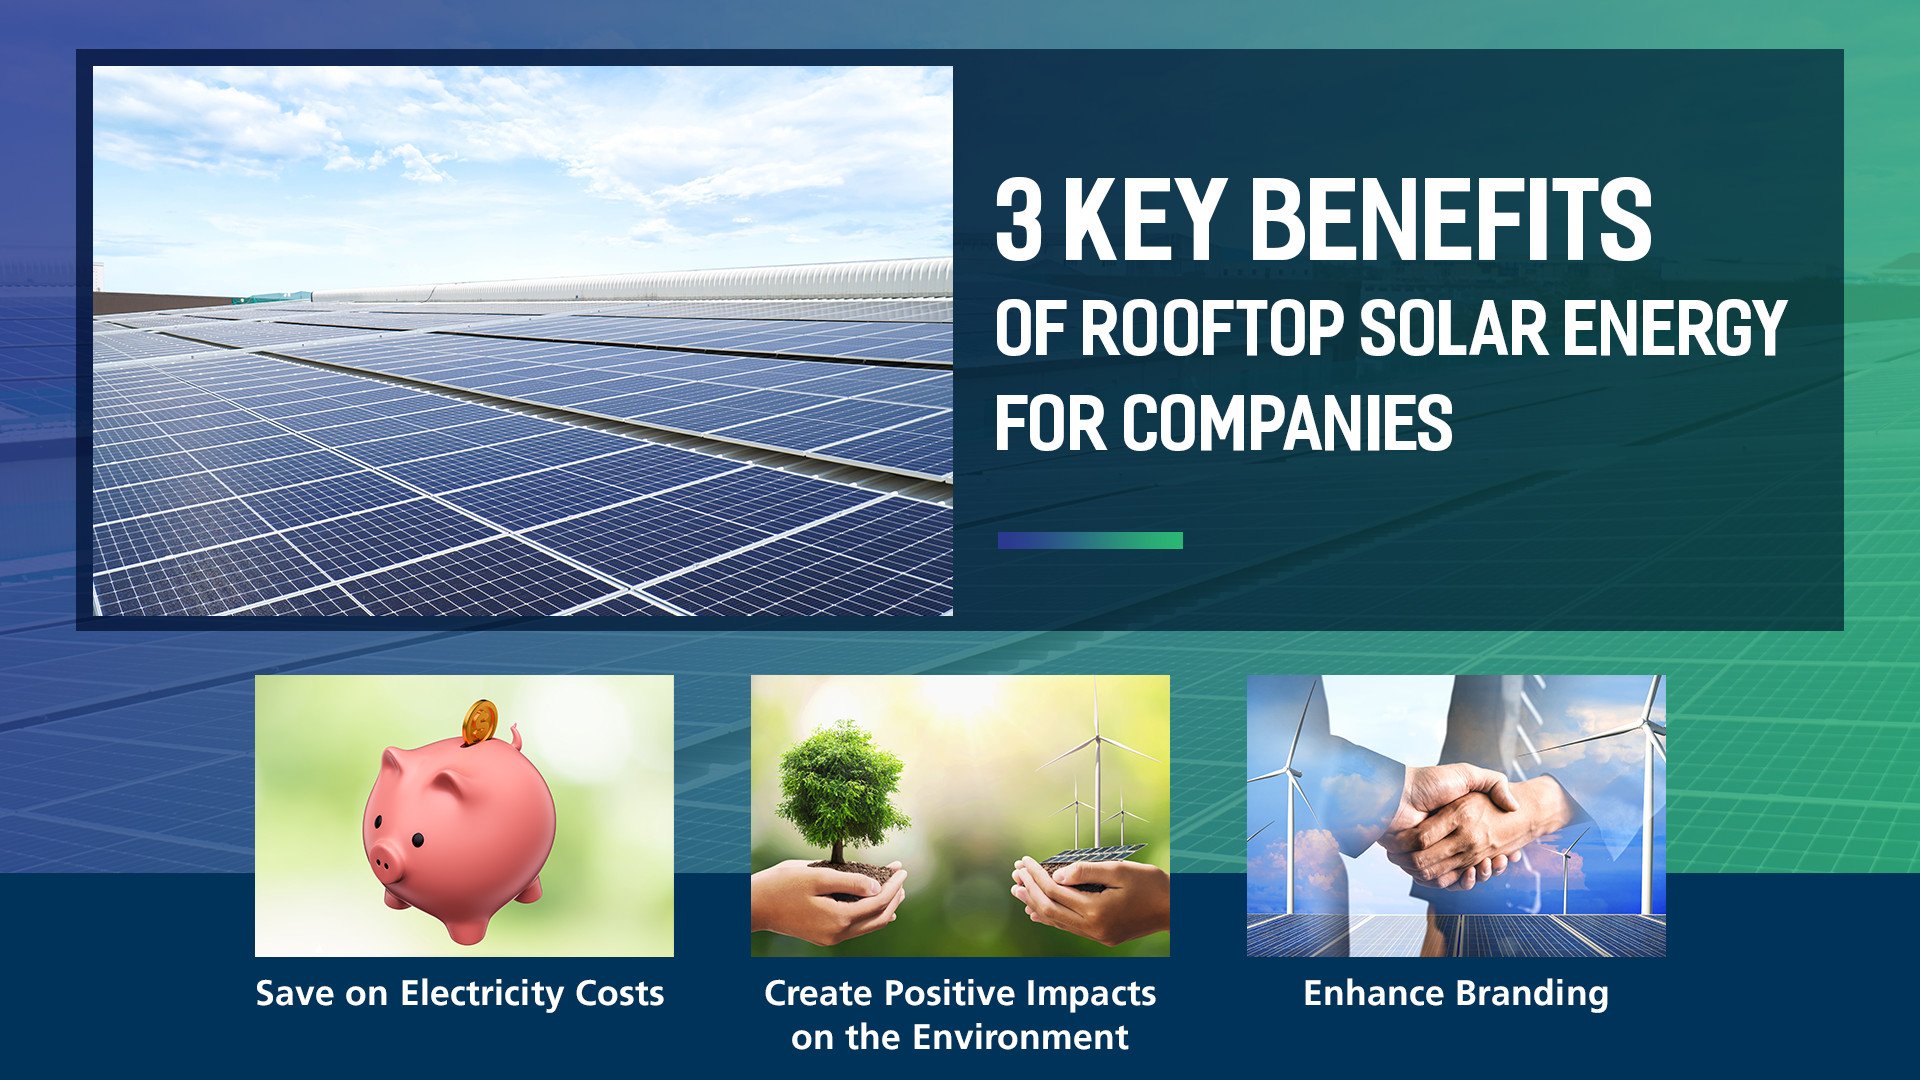 3 Key Benefits of Rooftop Solar Energy for Companies